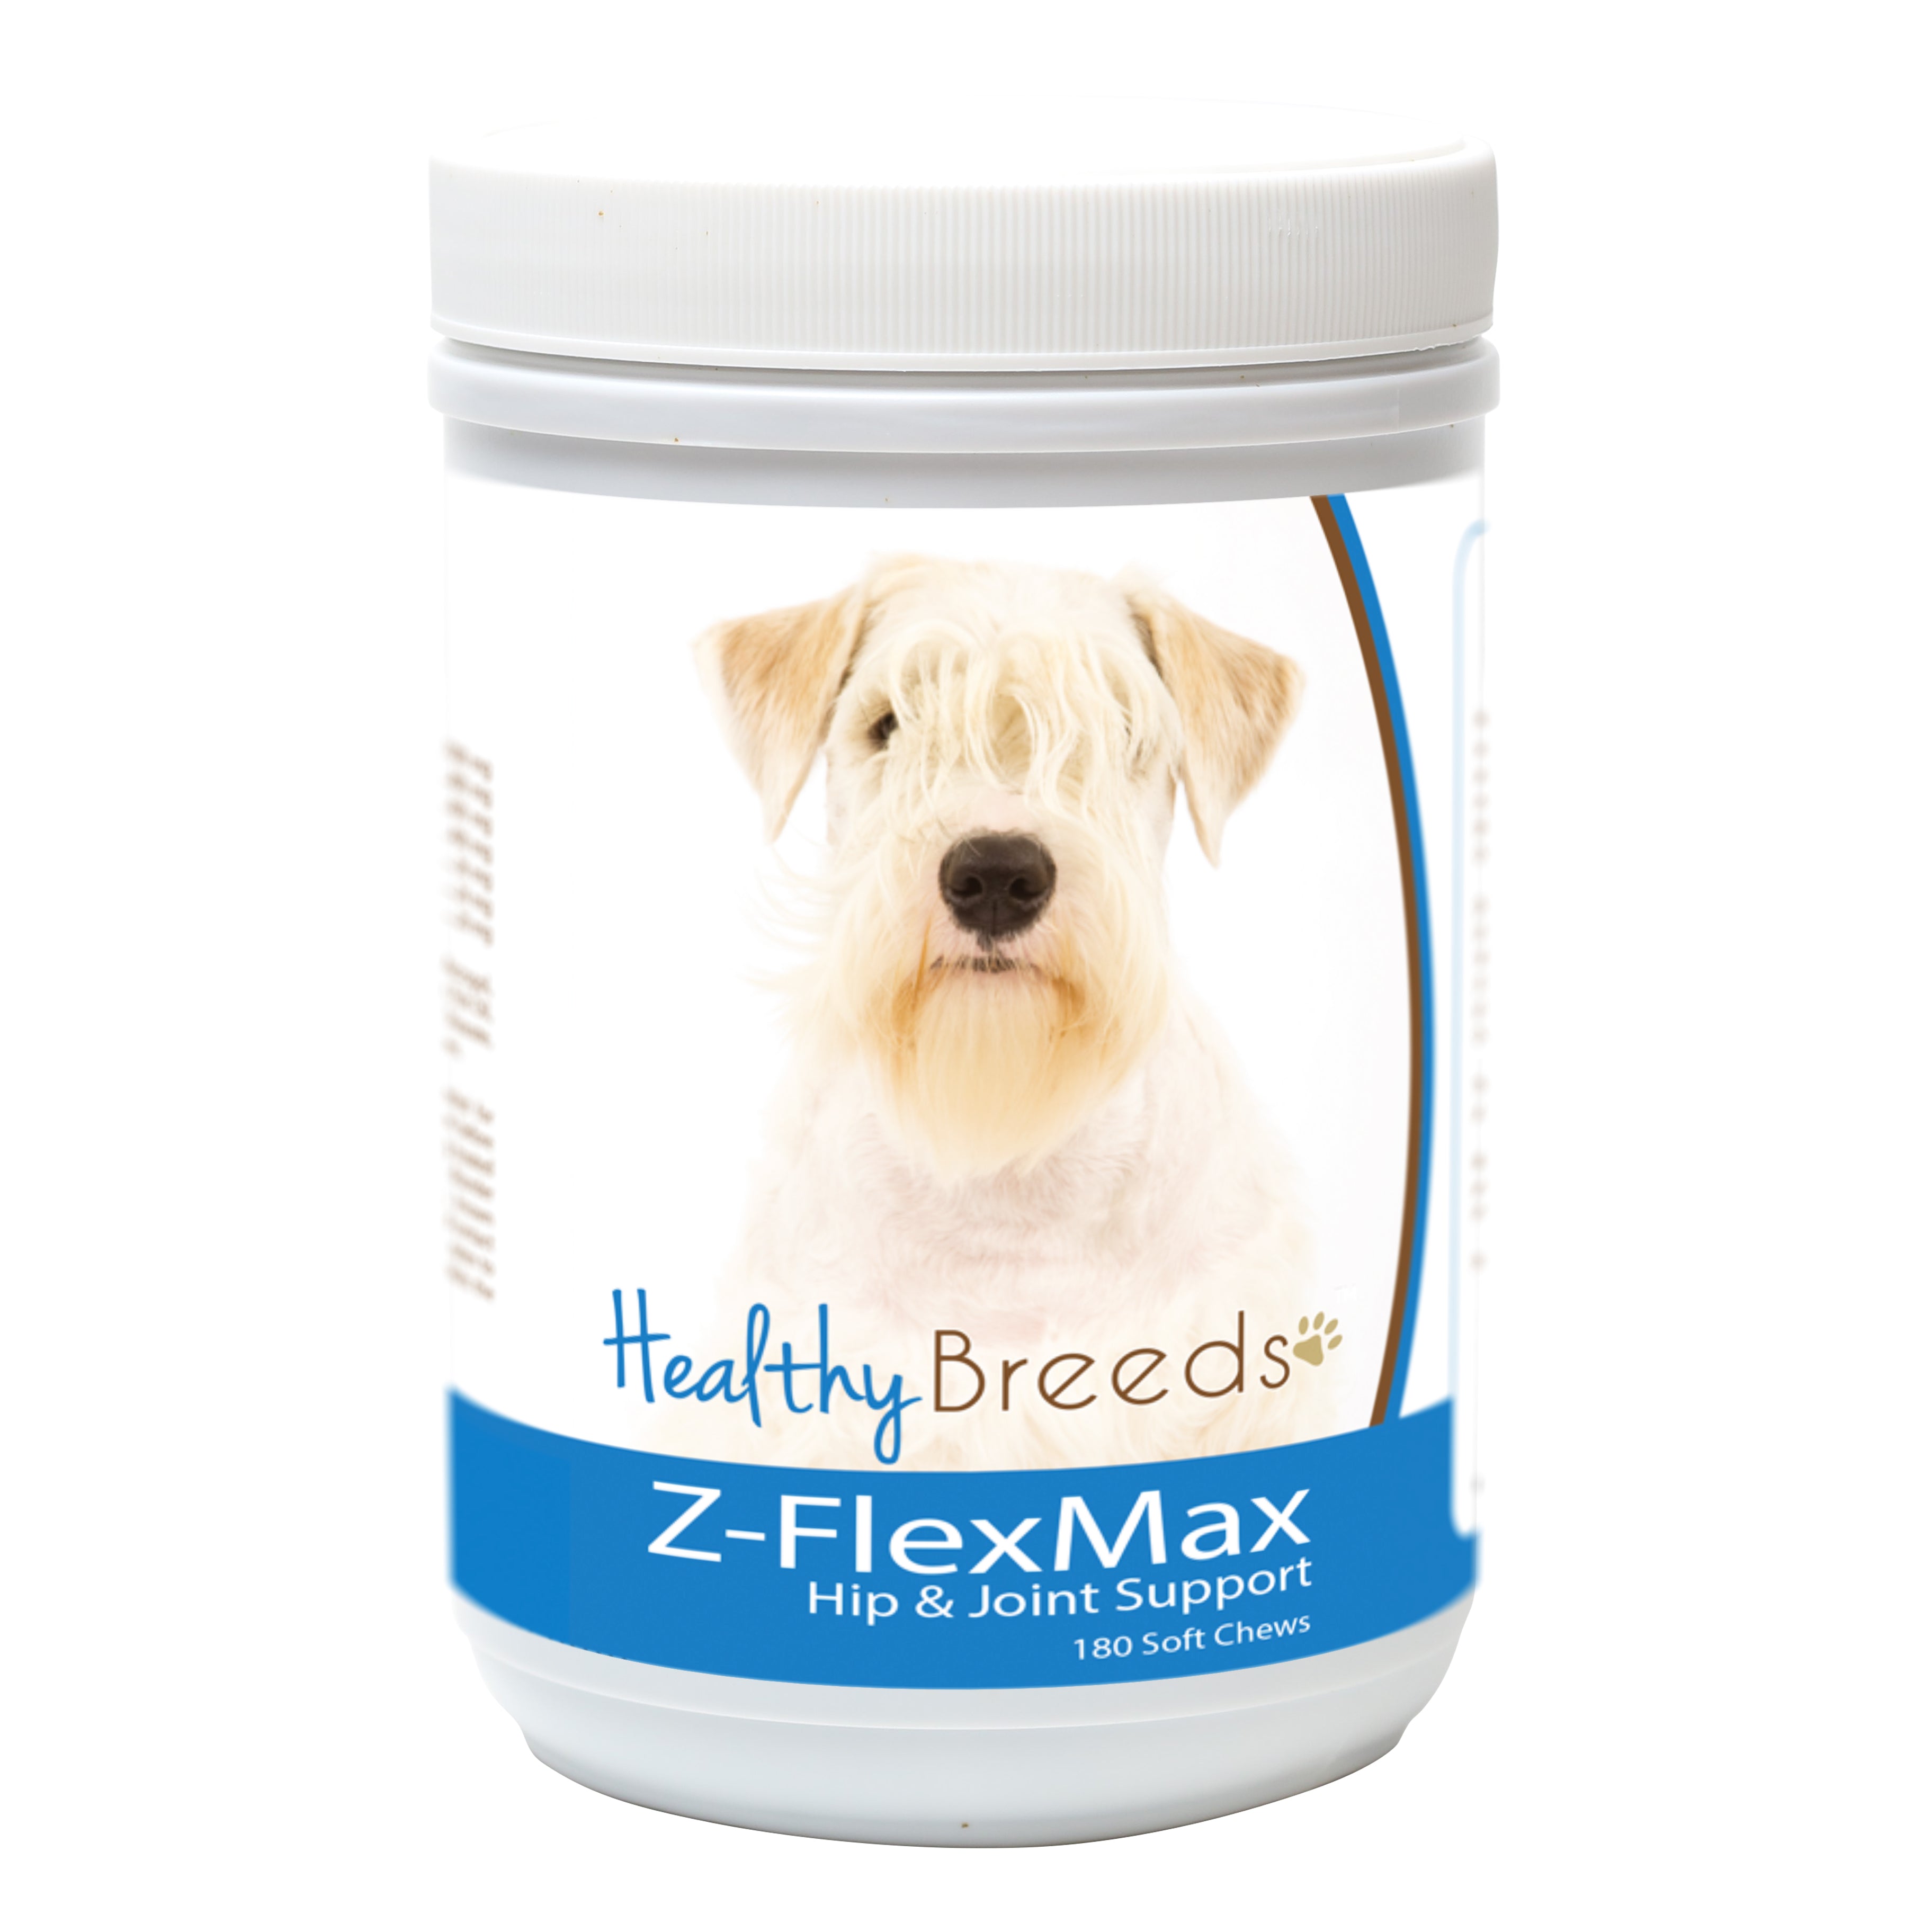 Sealyham Terrier Z-Flex Max Dog Hip and Joint Support 180 Count